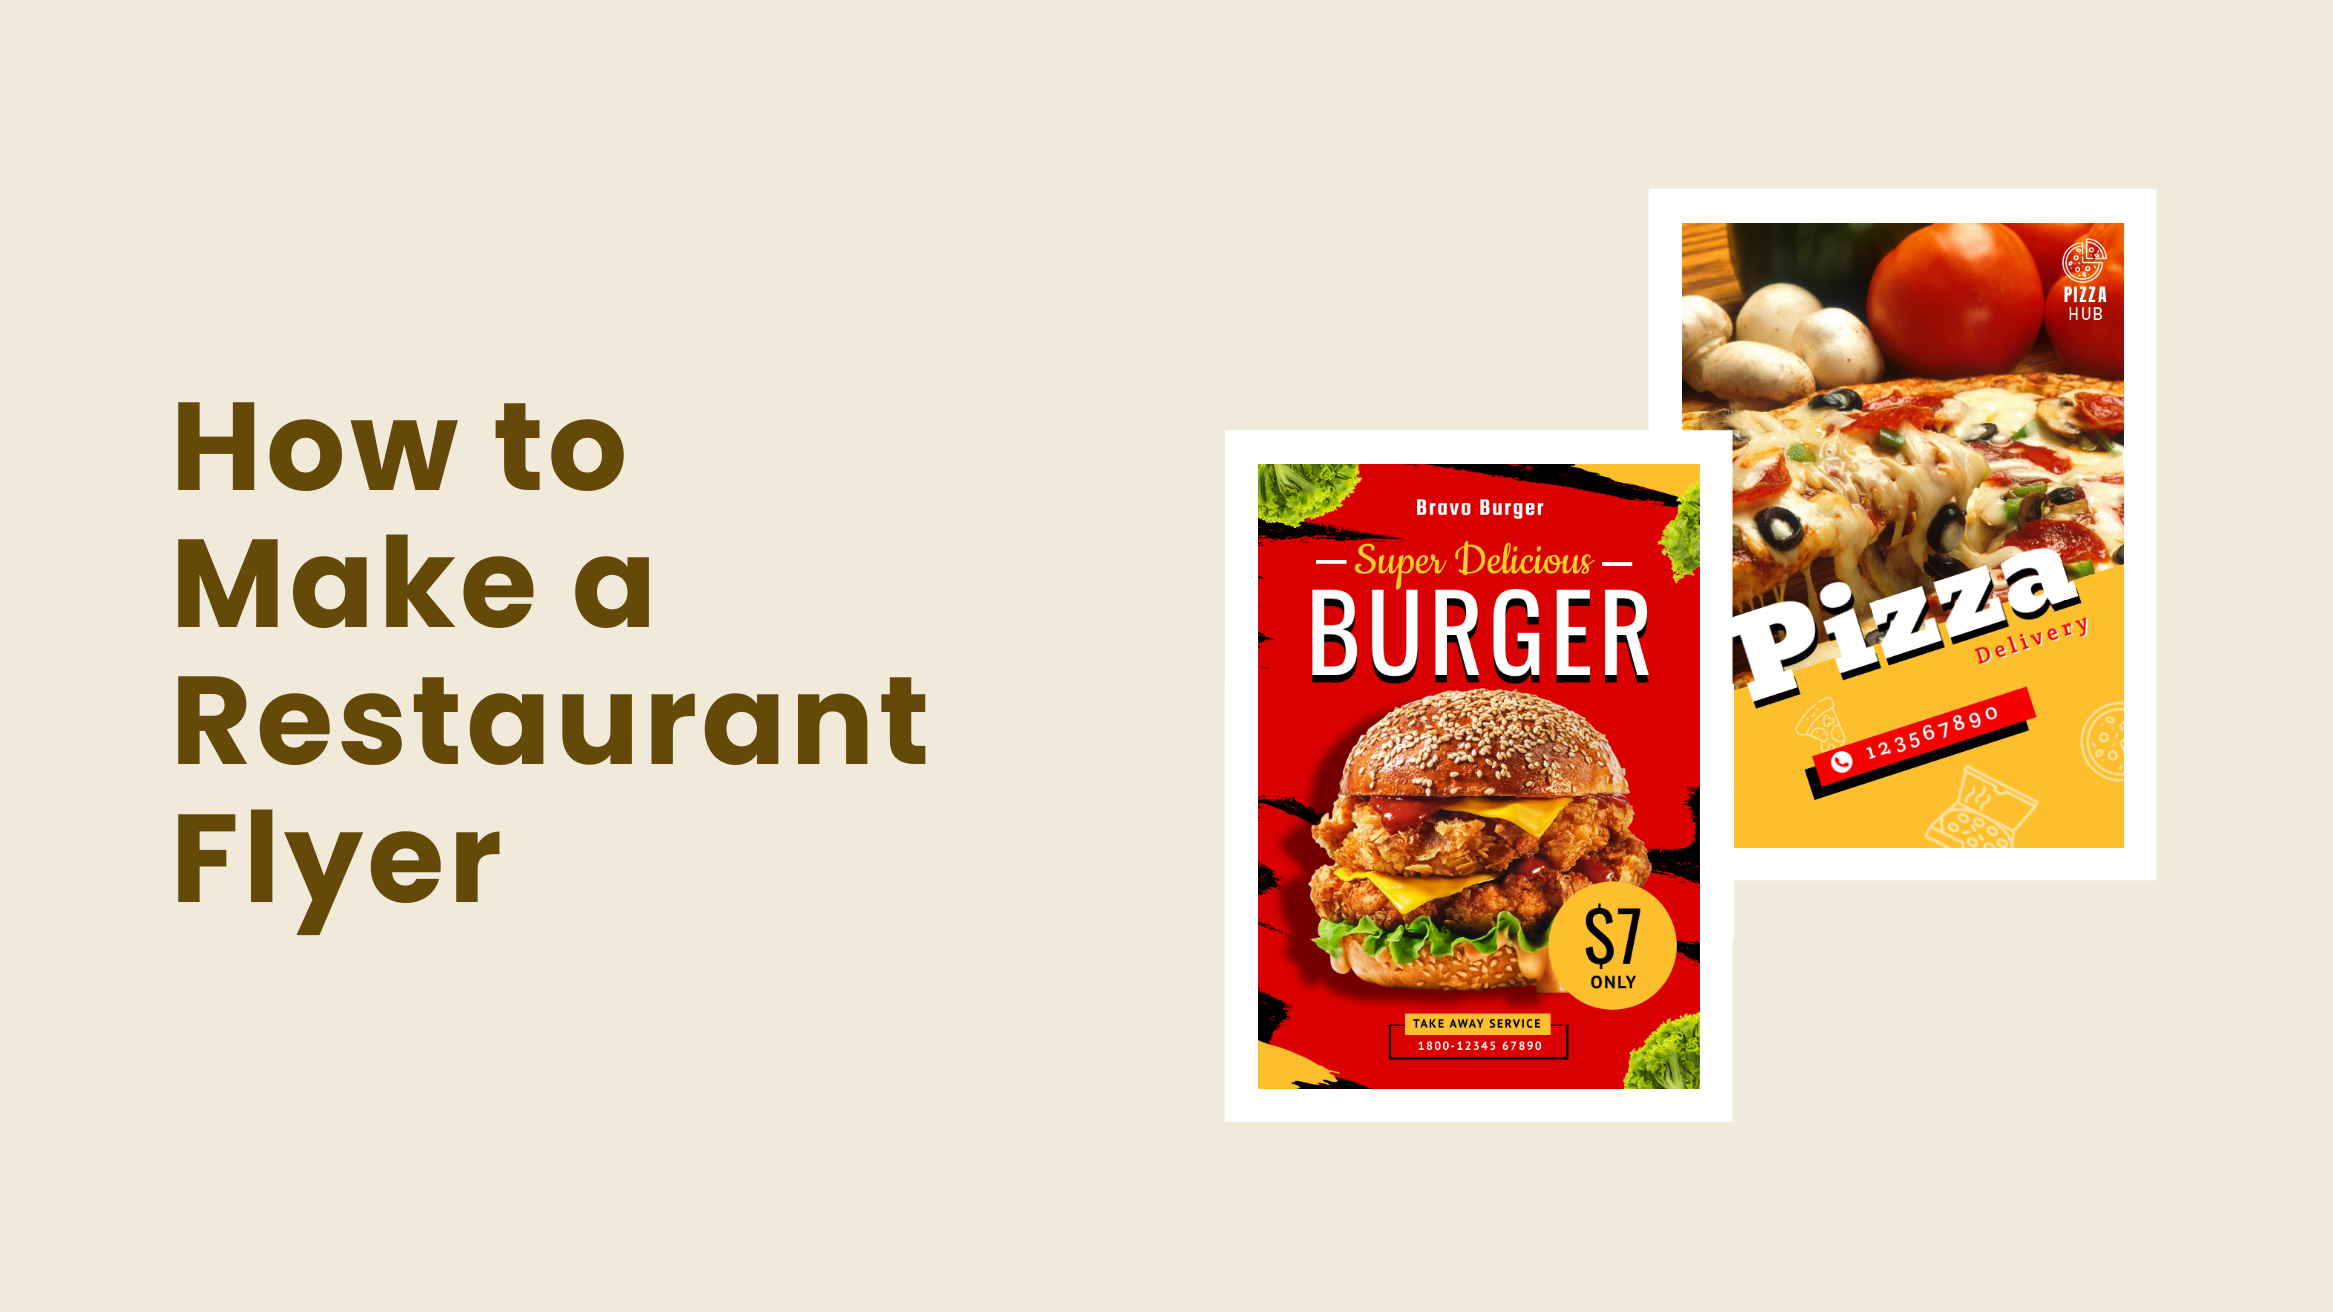 How to Make a Restaurant Flyer